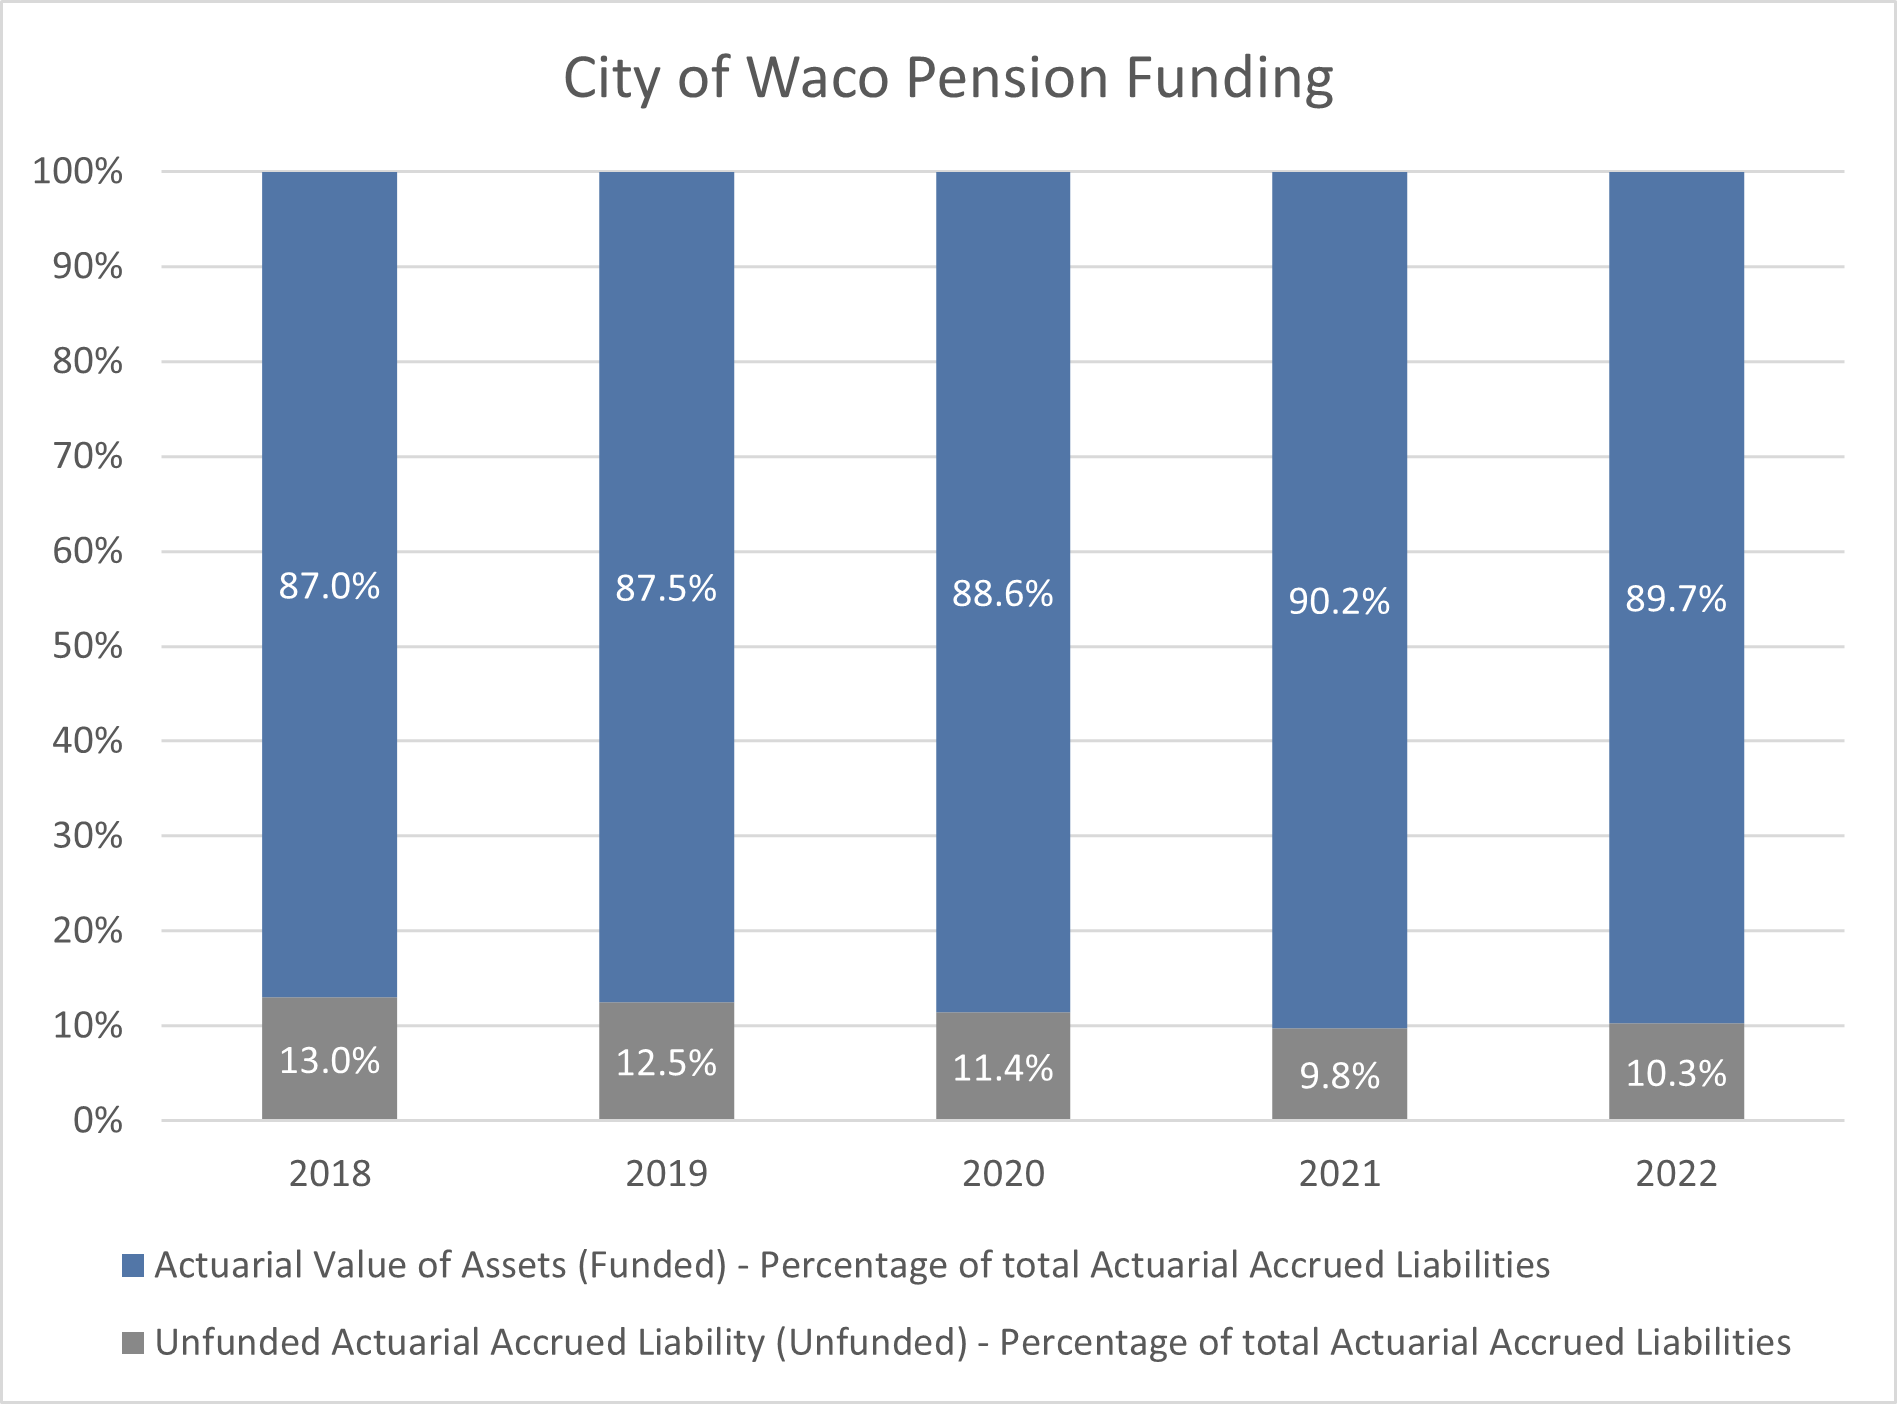 Graph of the pension funding for the last 5 years